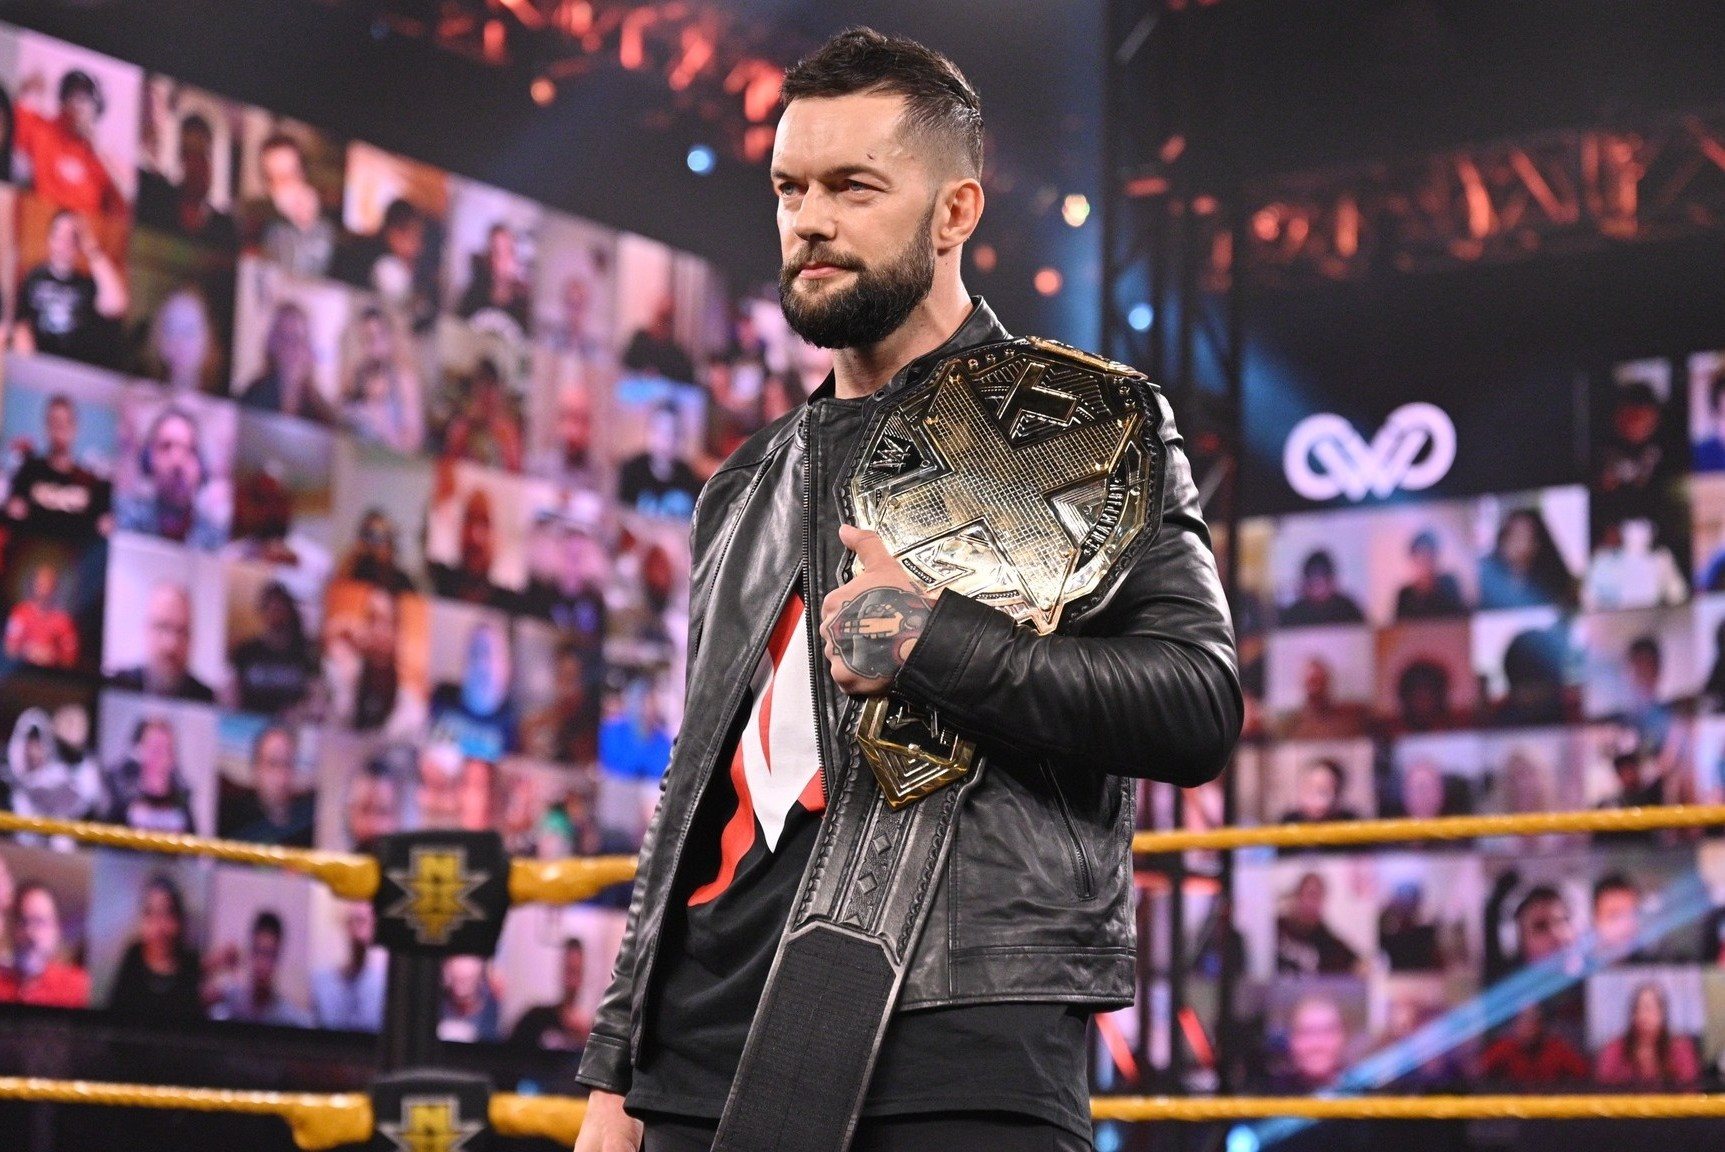 Transition To Wwe And Nxt Dominance